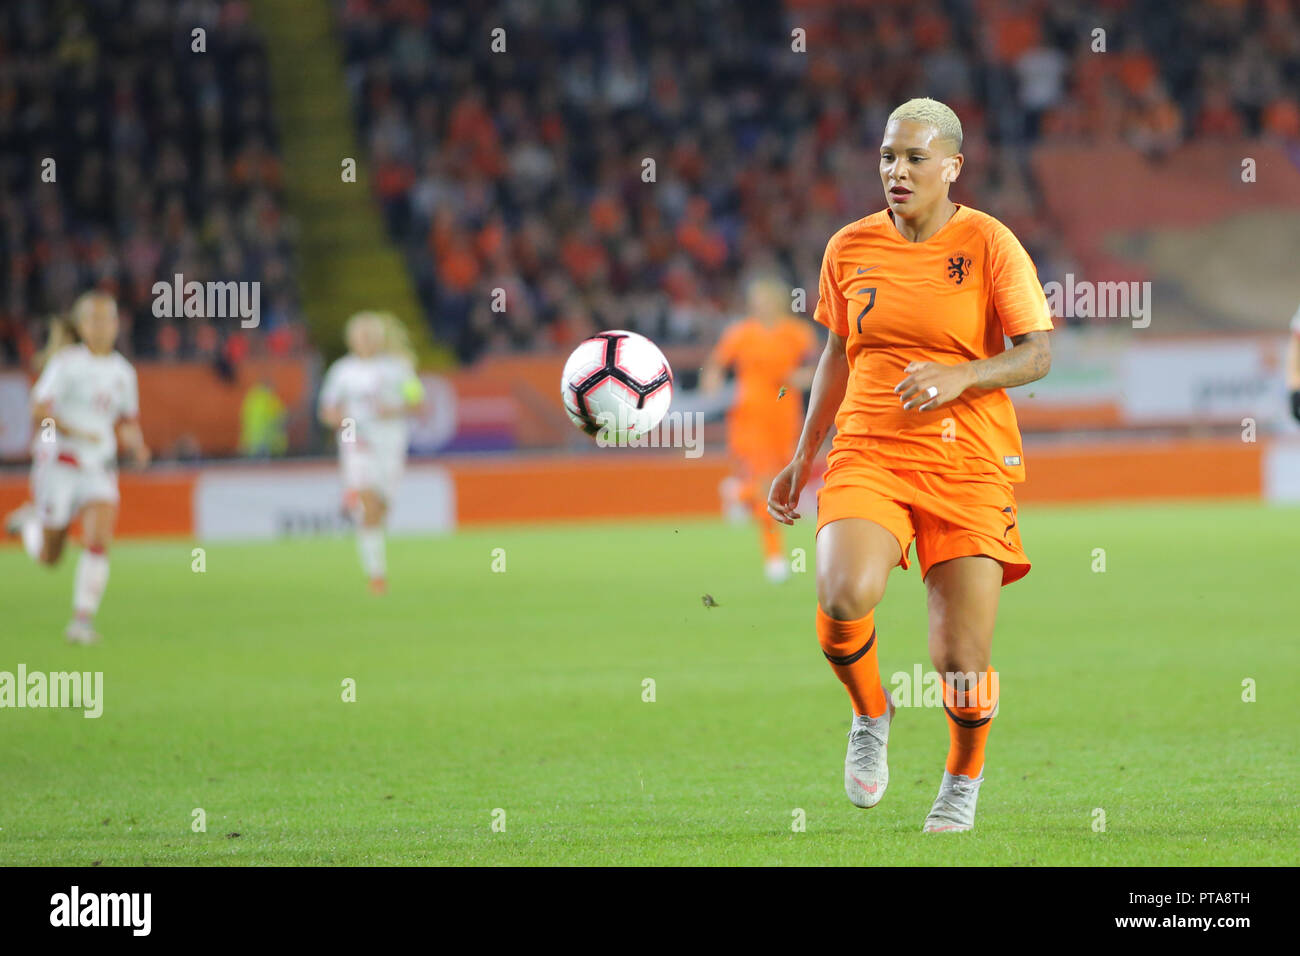 Netherlands midfield, Shanice van de Sanden, stand with the ball during a football match against Denmark, in Breda, 5th of October 2018. Stock Photo